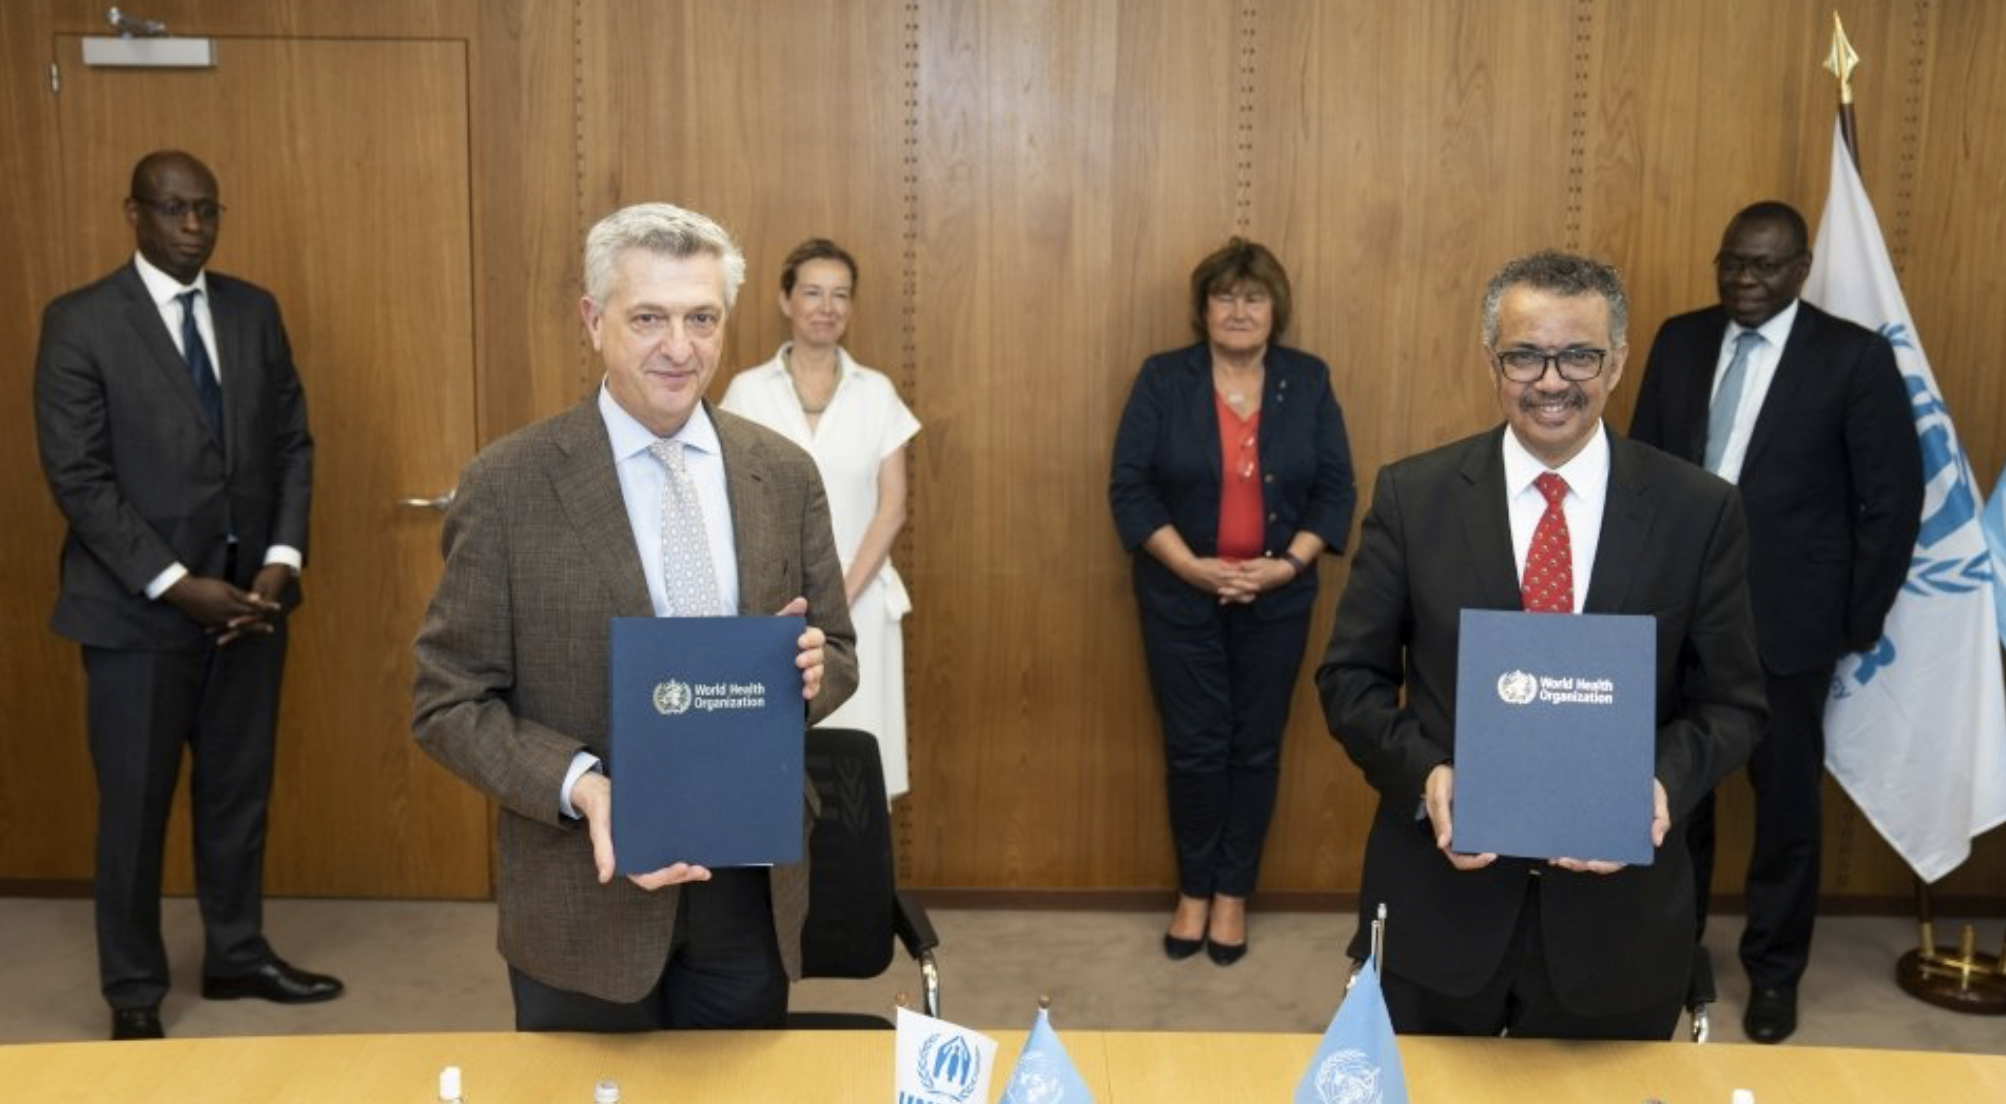 UN High Commissioner for Refugees Filippo Grandi (left) and Director-General World Health Organization Dr. Tedros Adhanom Ghebreyesus sign a Memorandum of Understanding on the integration of refugees in national health preparedness and response plans globally. May 21, 2020, Geneva, Switzerland (Photo by Christopher Black courtesy World Health Organization) Posted for media use 